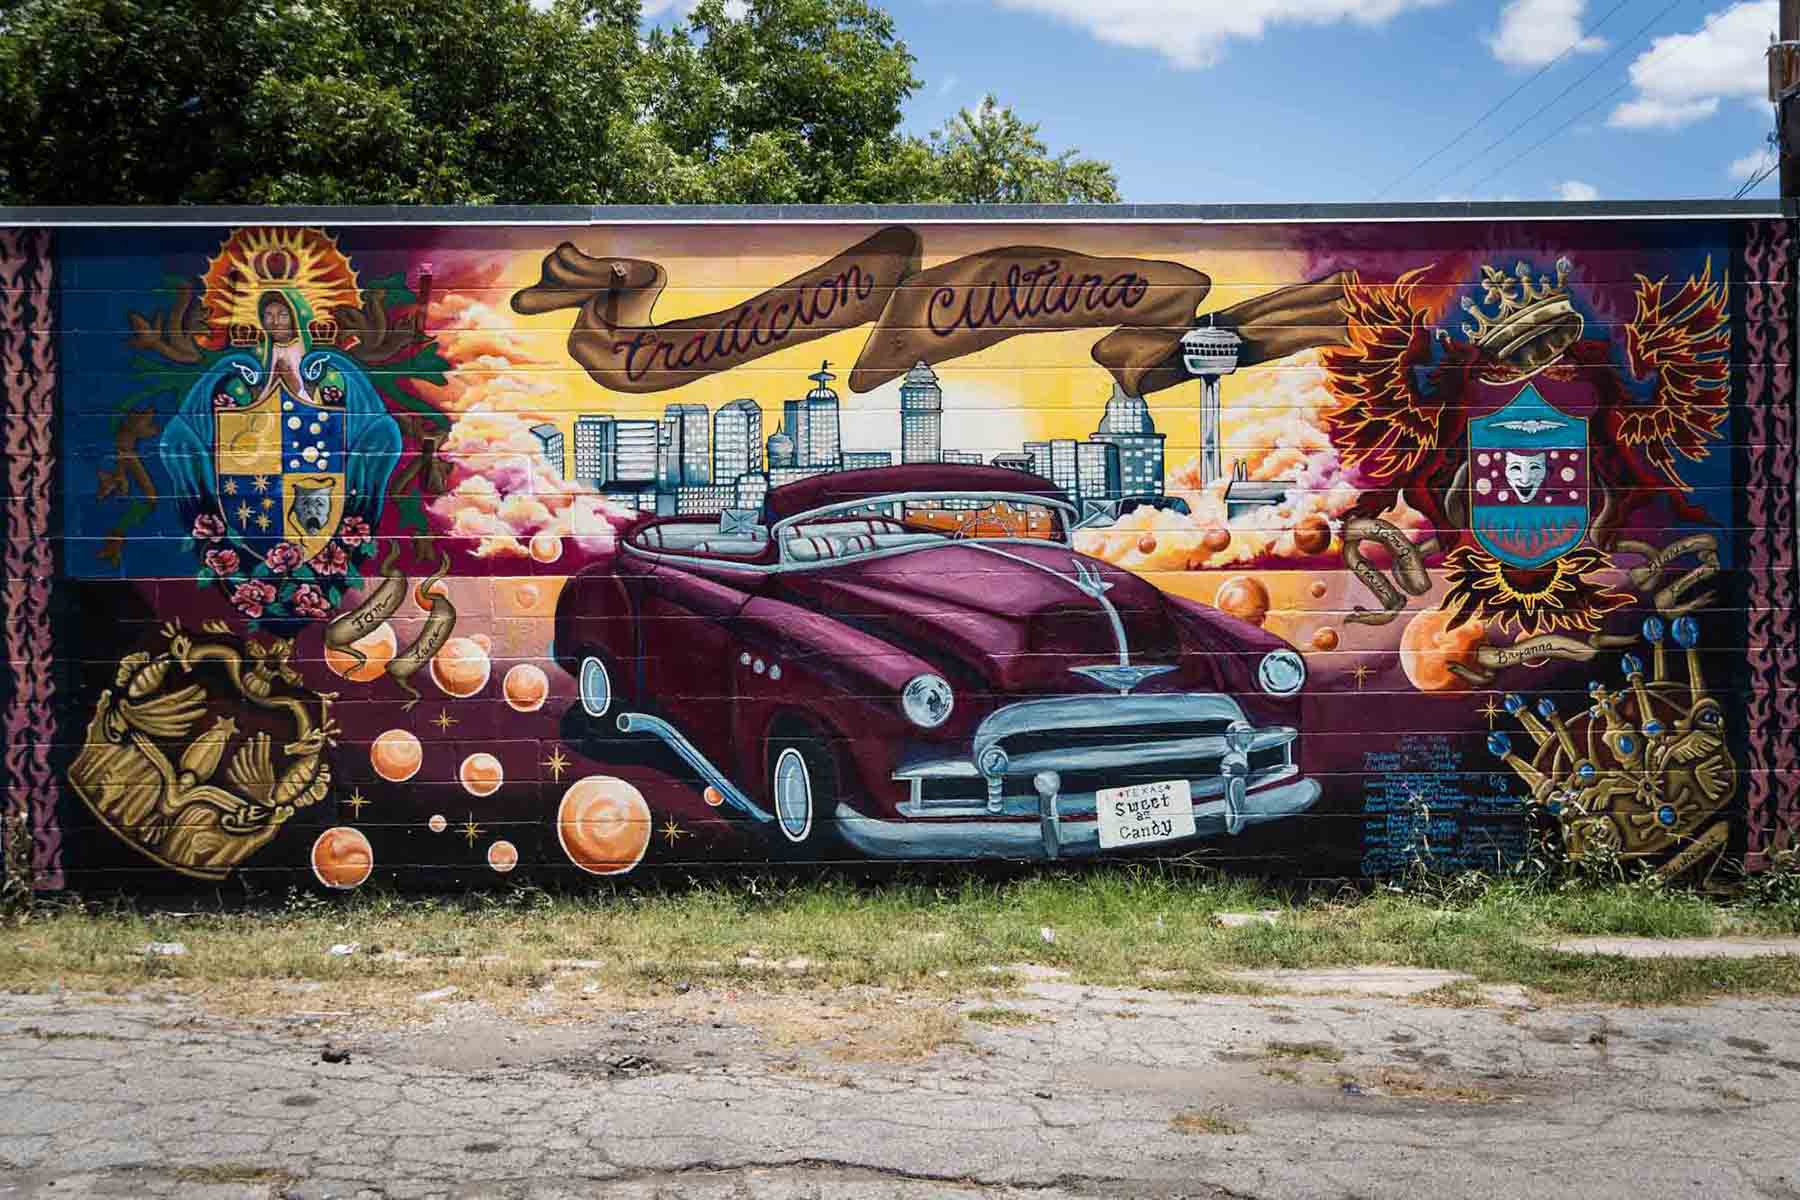 Colorful mural of car and religious imagery against wall in San Antonio